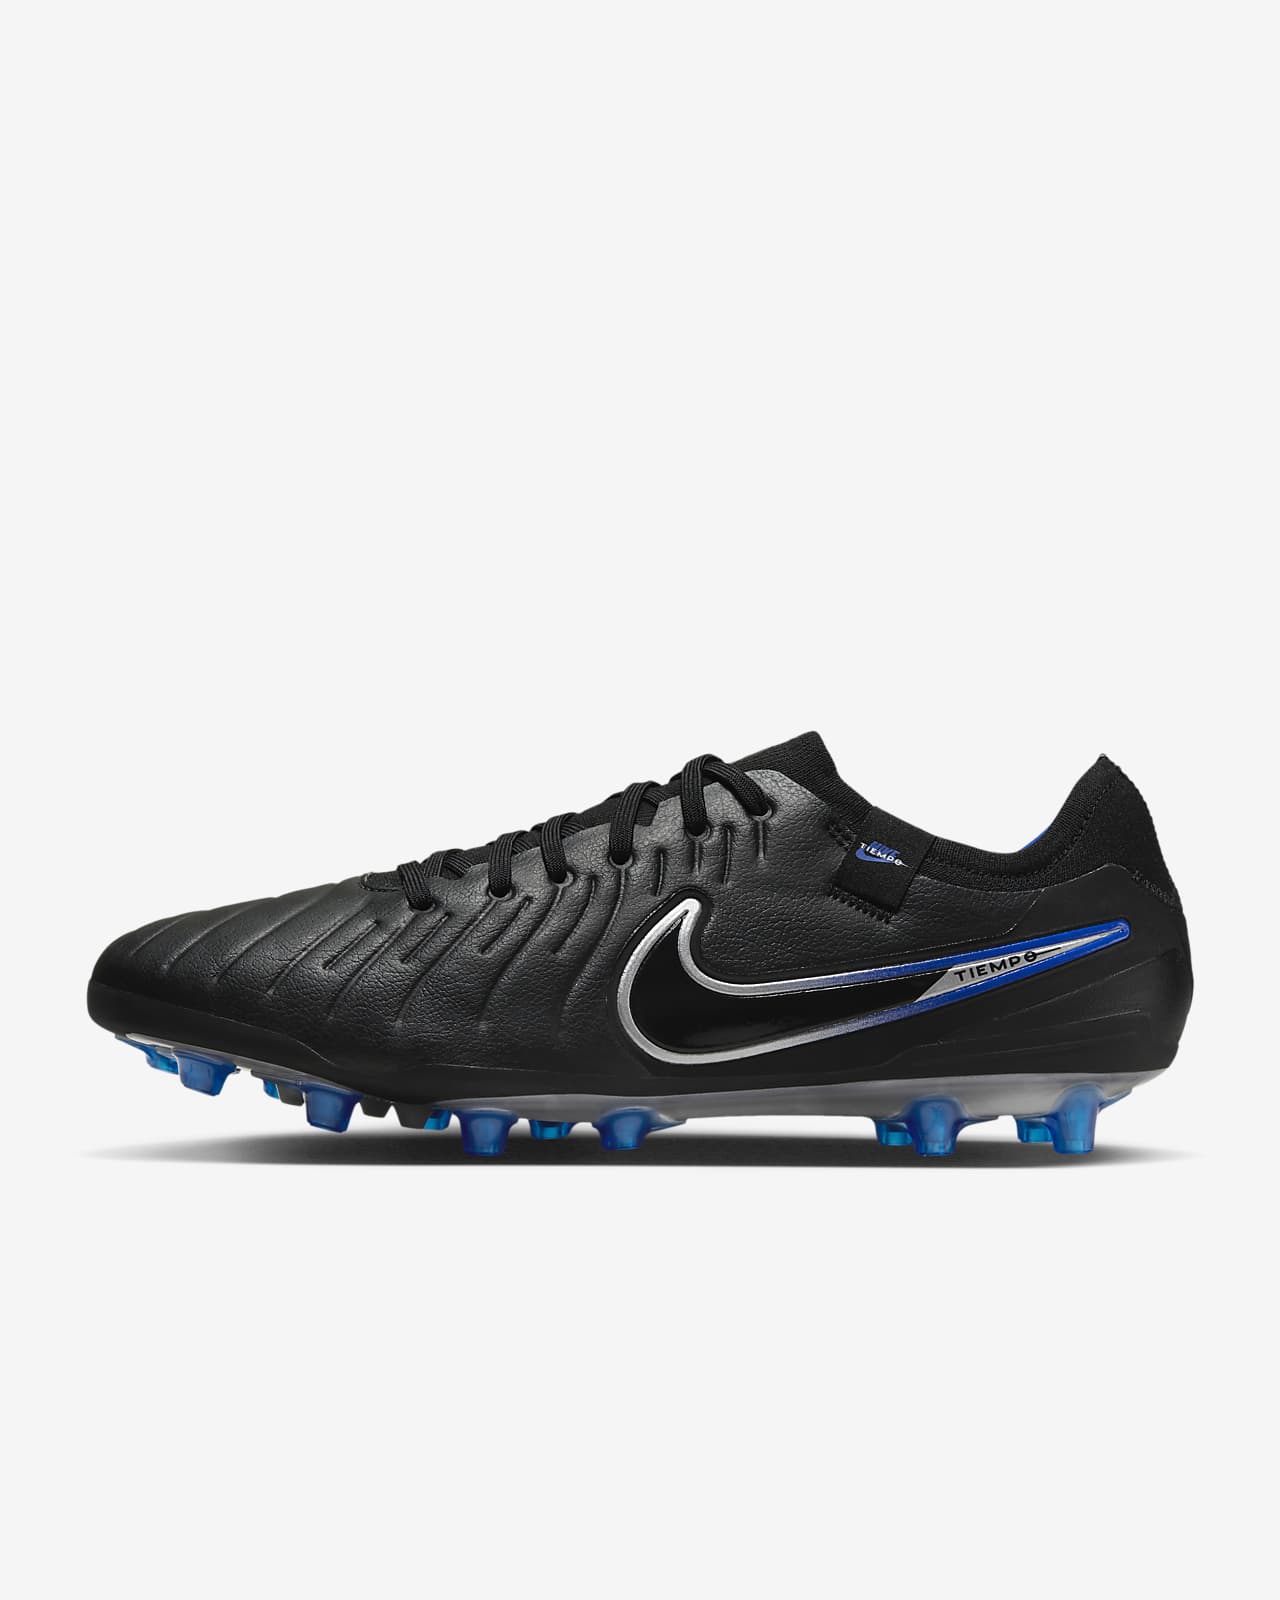 Nike Tiempo Legend 10 Pro Artificial-Grass Low-Top Football Boot